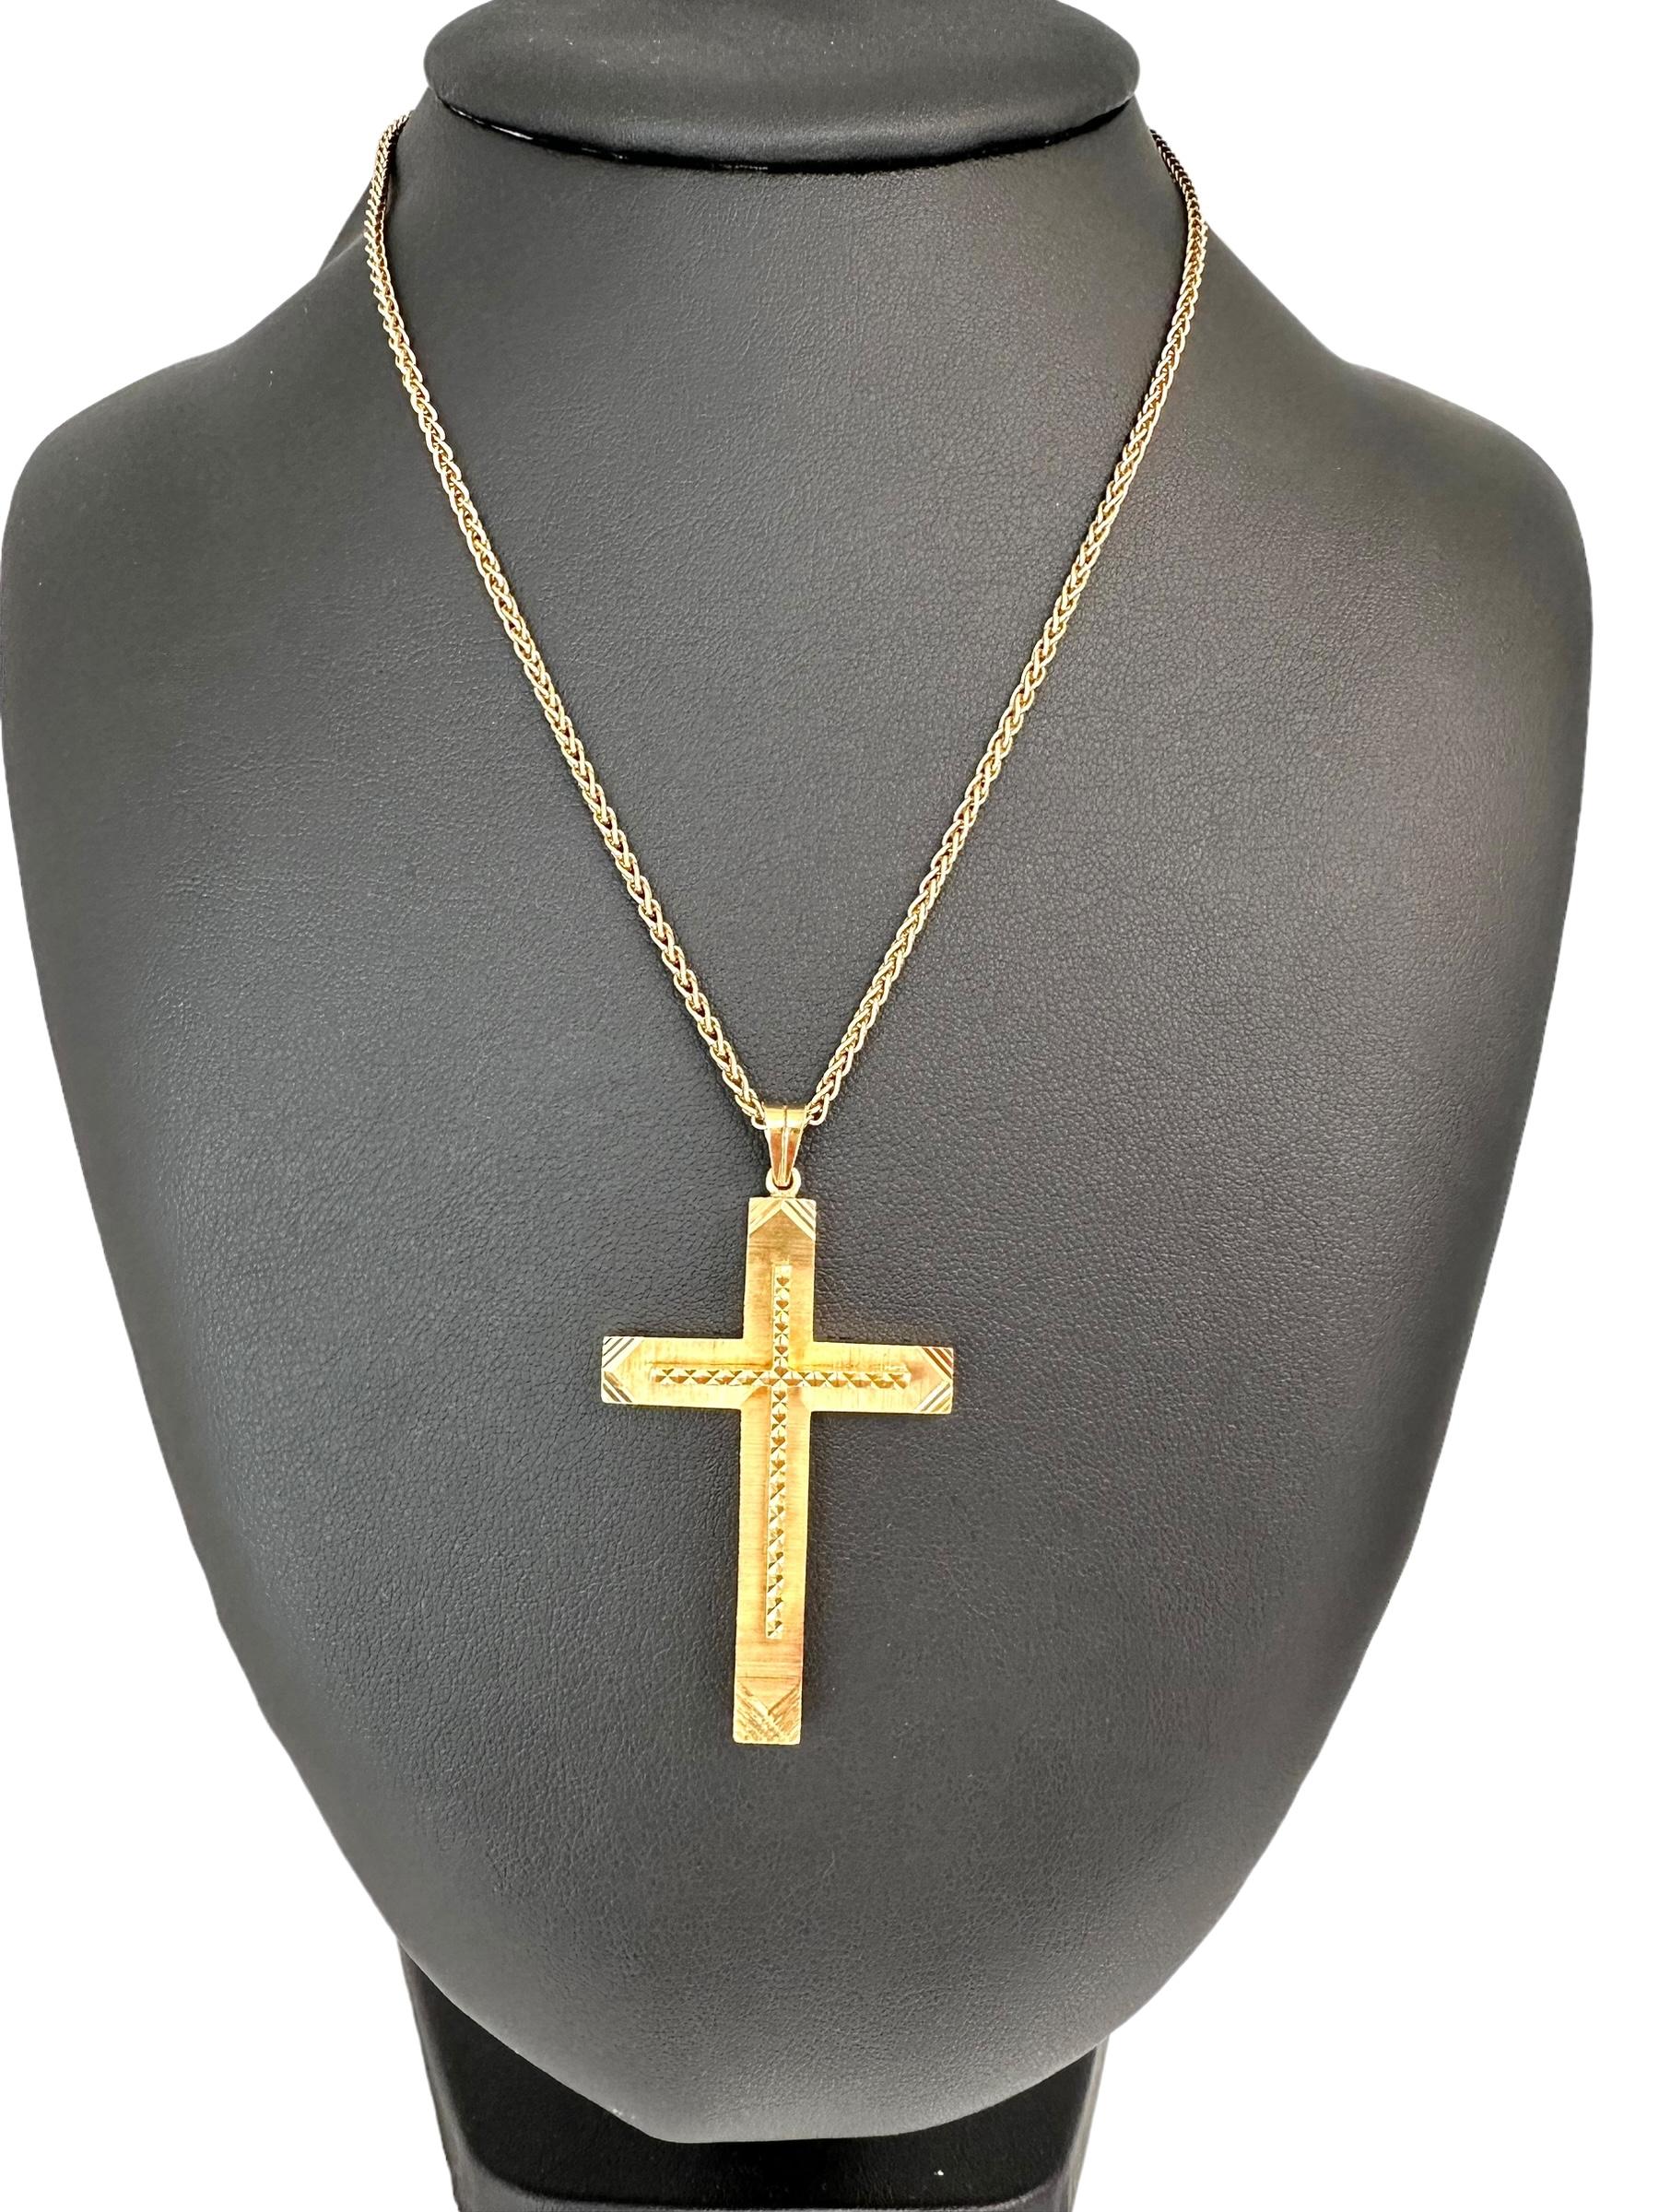 This Italian Double Cross Yellow Gold Pendant exudes a sense of elegance and spirituality. Crafted from luxurious 18kt yellow gold, this pendant features a unique design with a smaller cross resting atop a larger one, creating a layered and